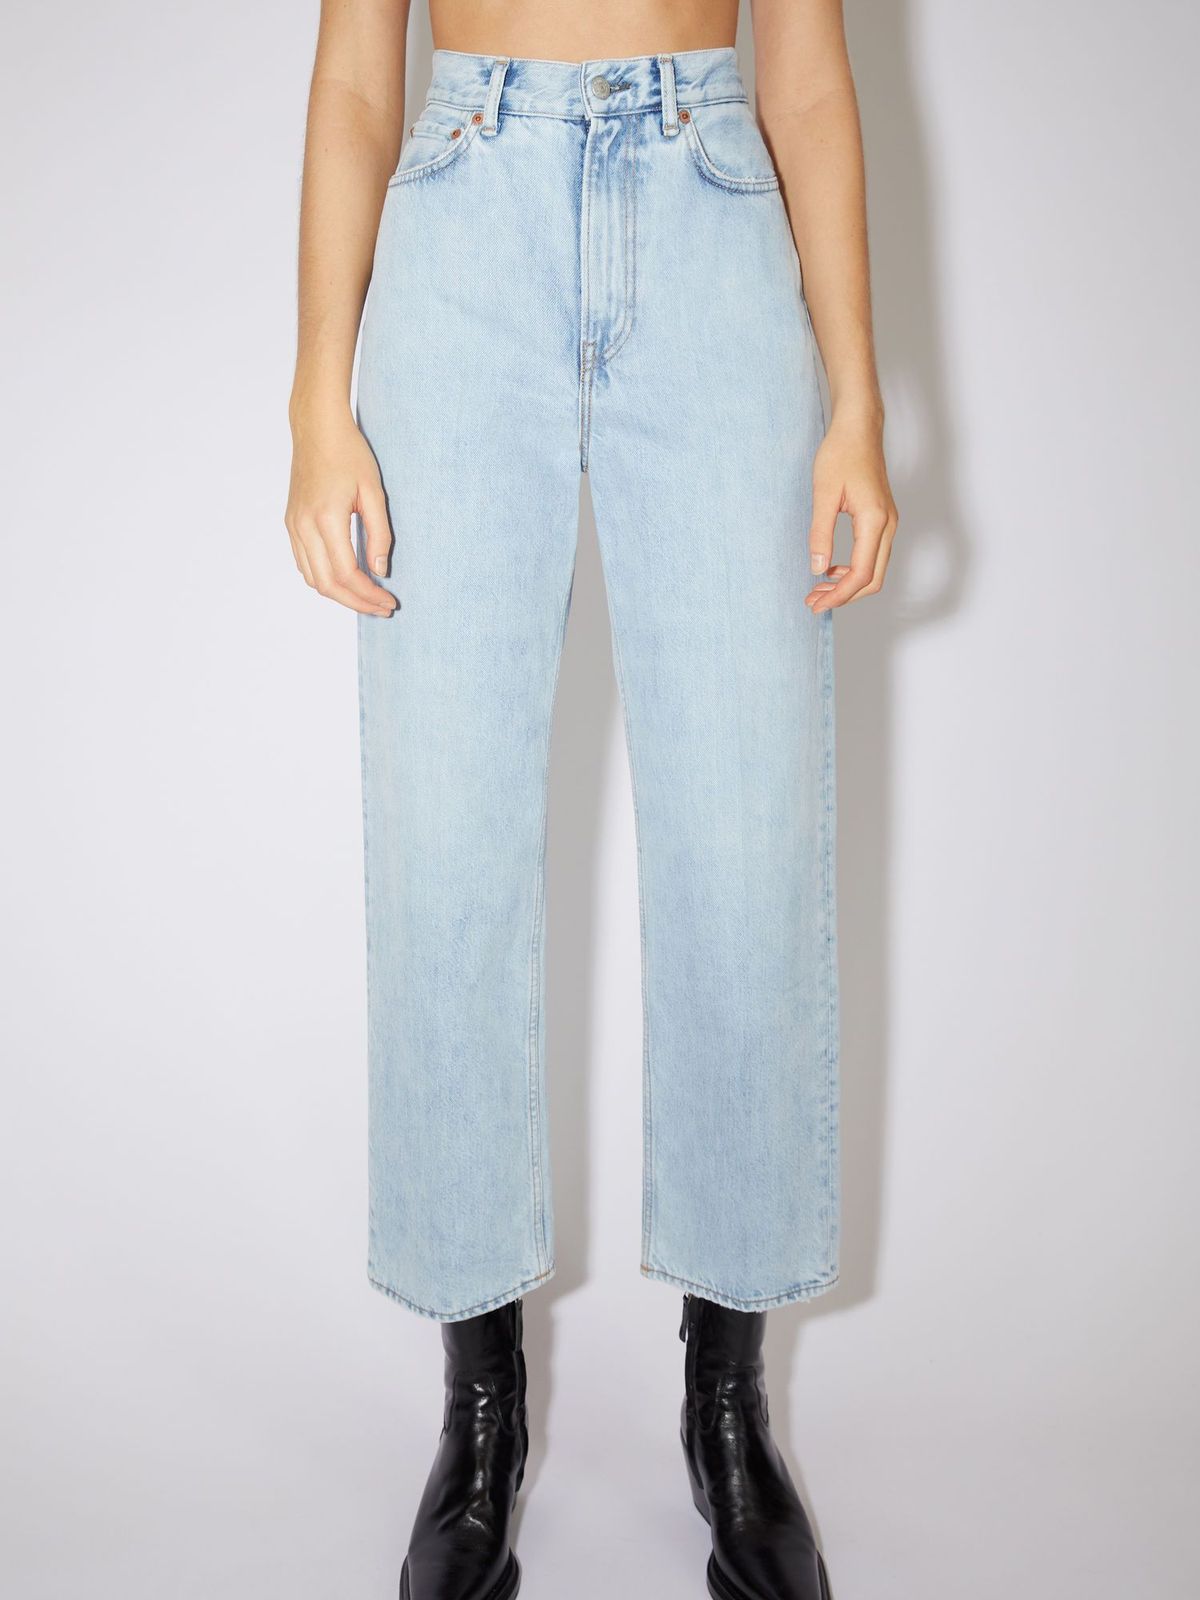 Acne Studios Relaxed Fit Jeans.jpg